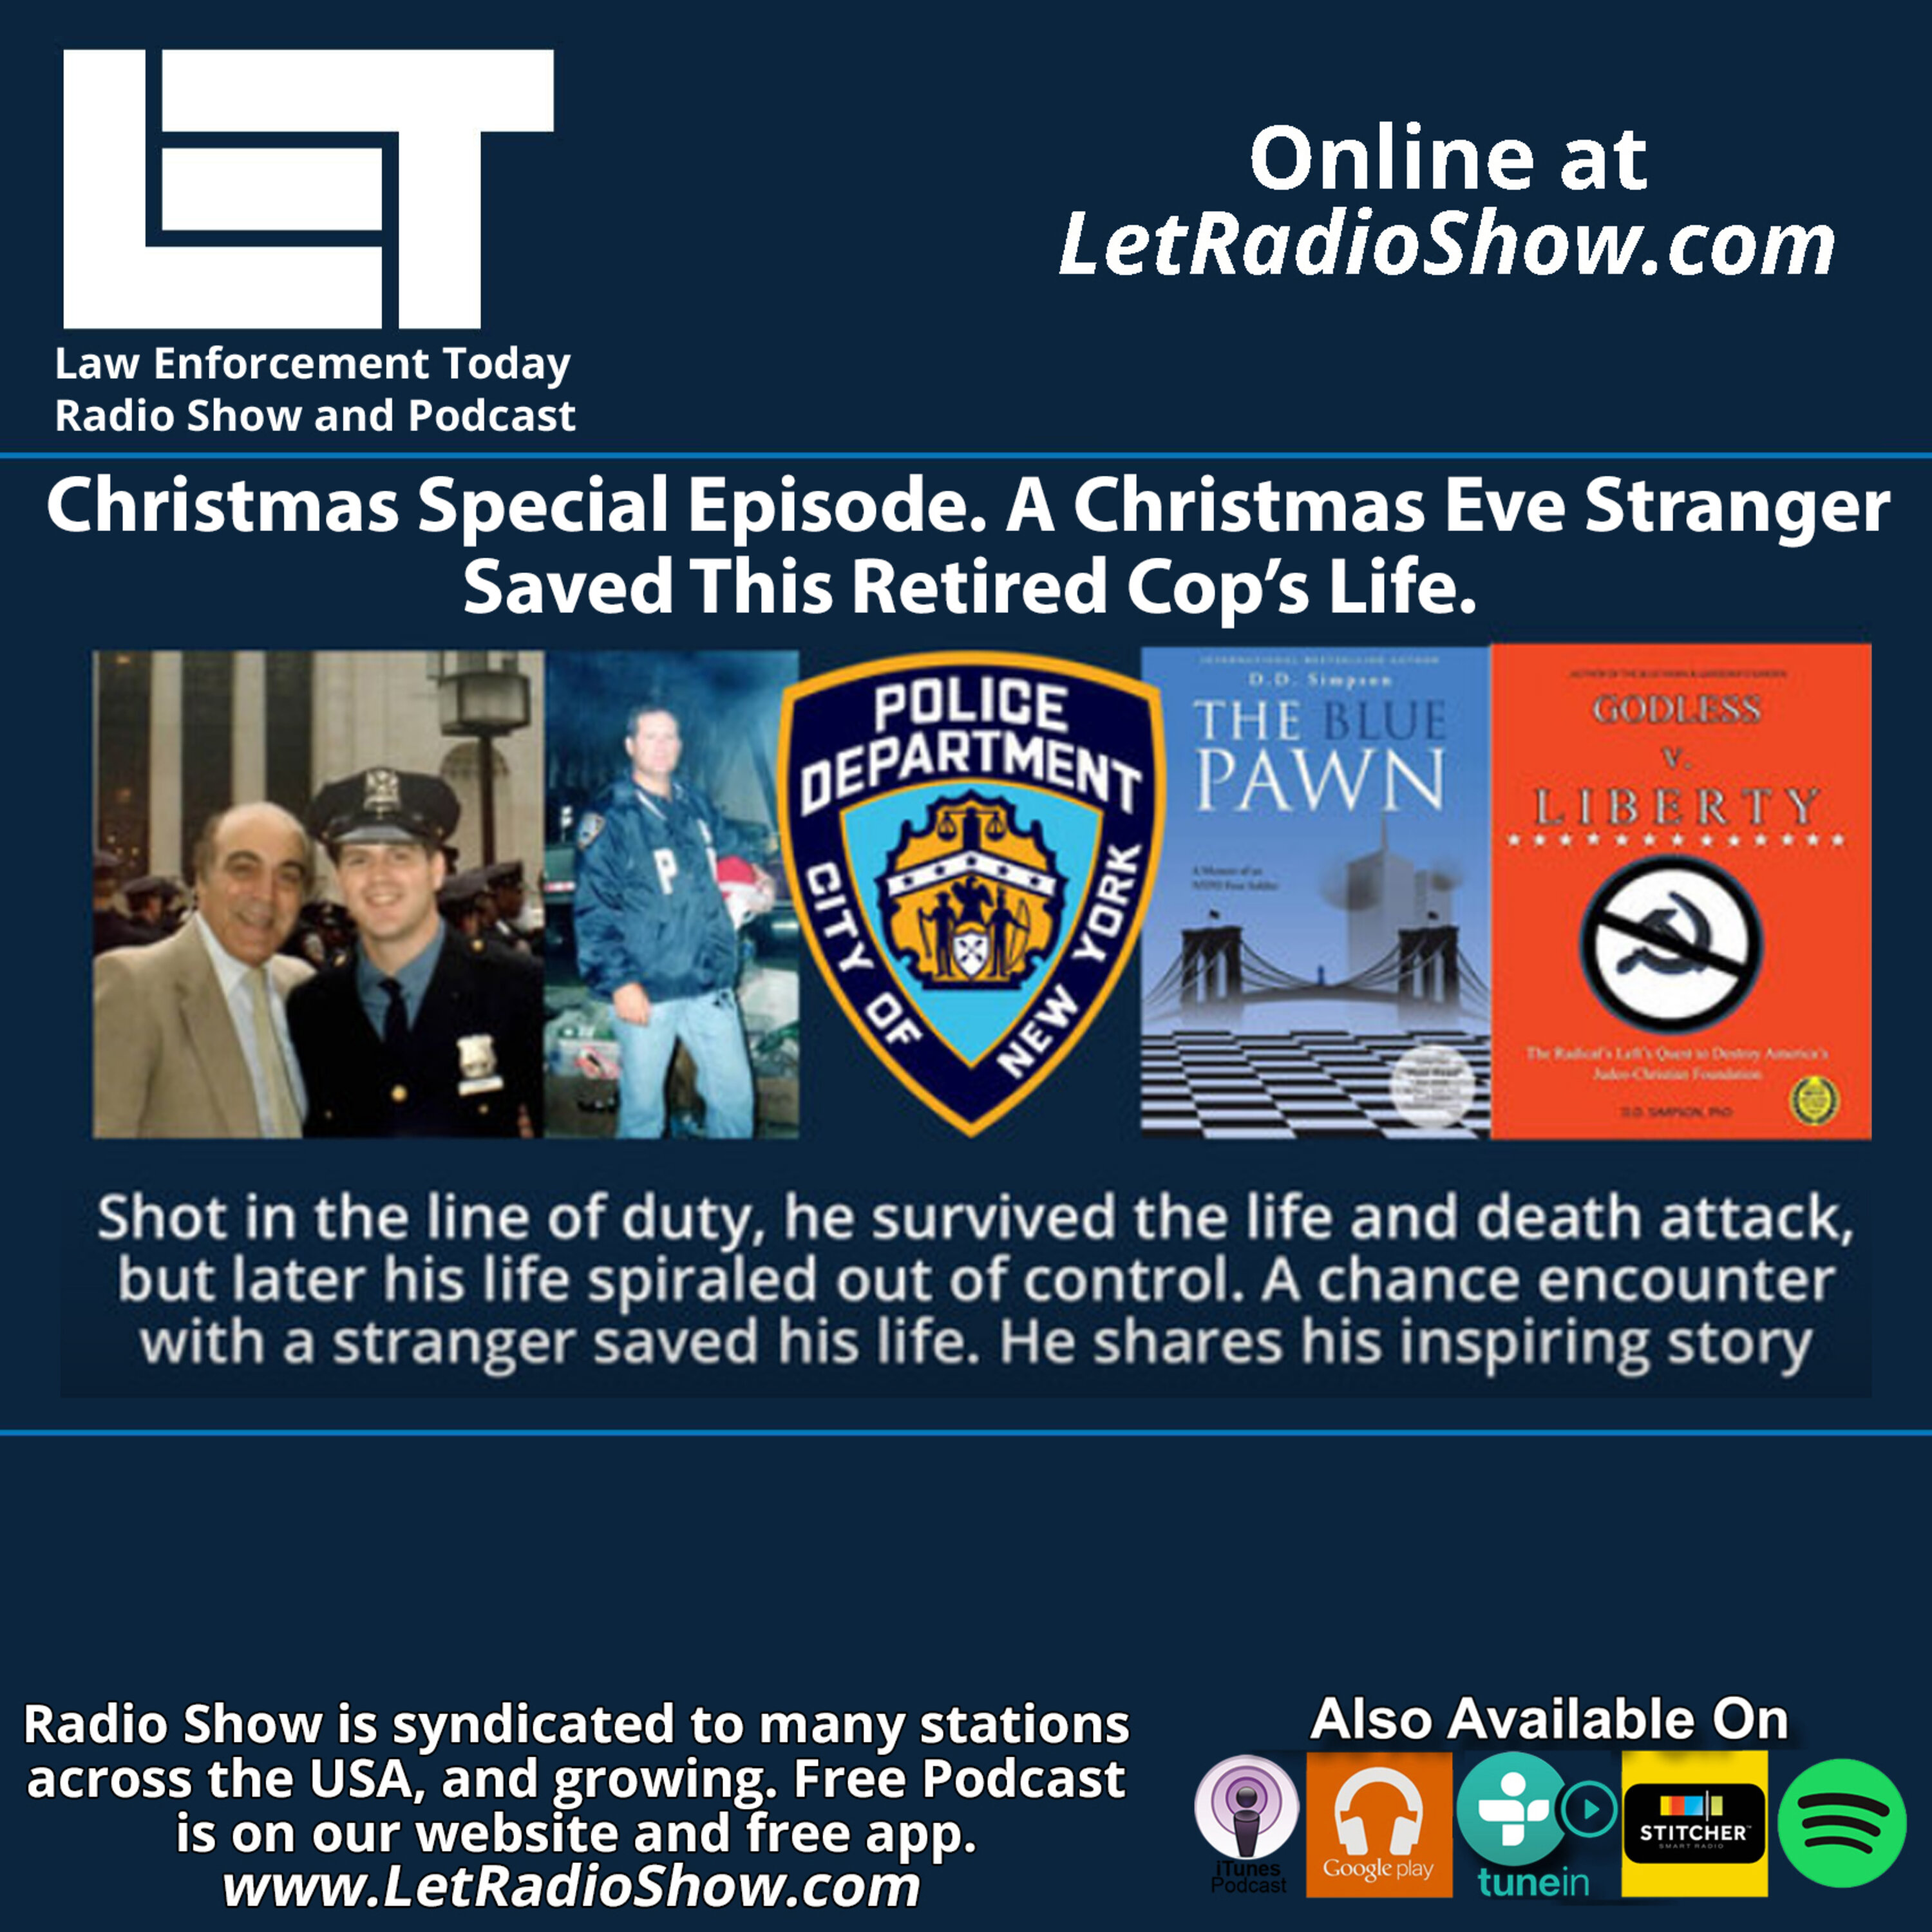 S6E103: Christmas Eve Stranger Saved Retired Cop’s Life. Christmas Special Episode. Image